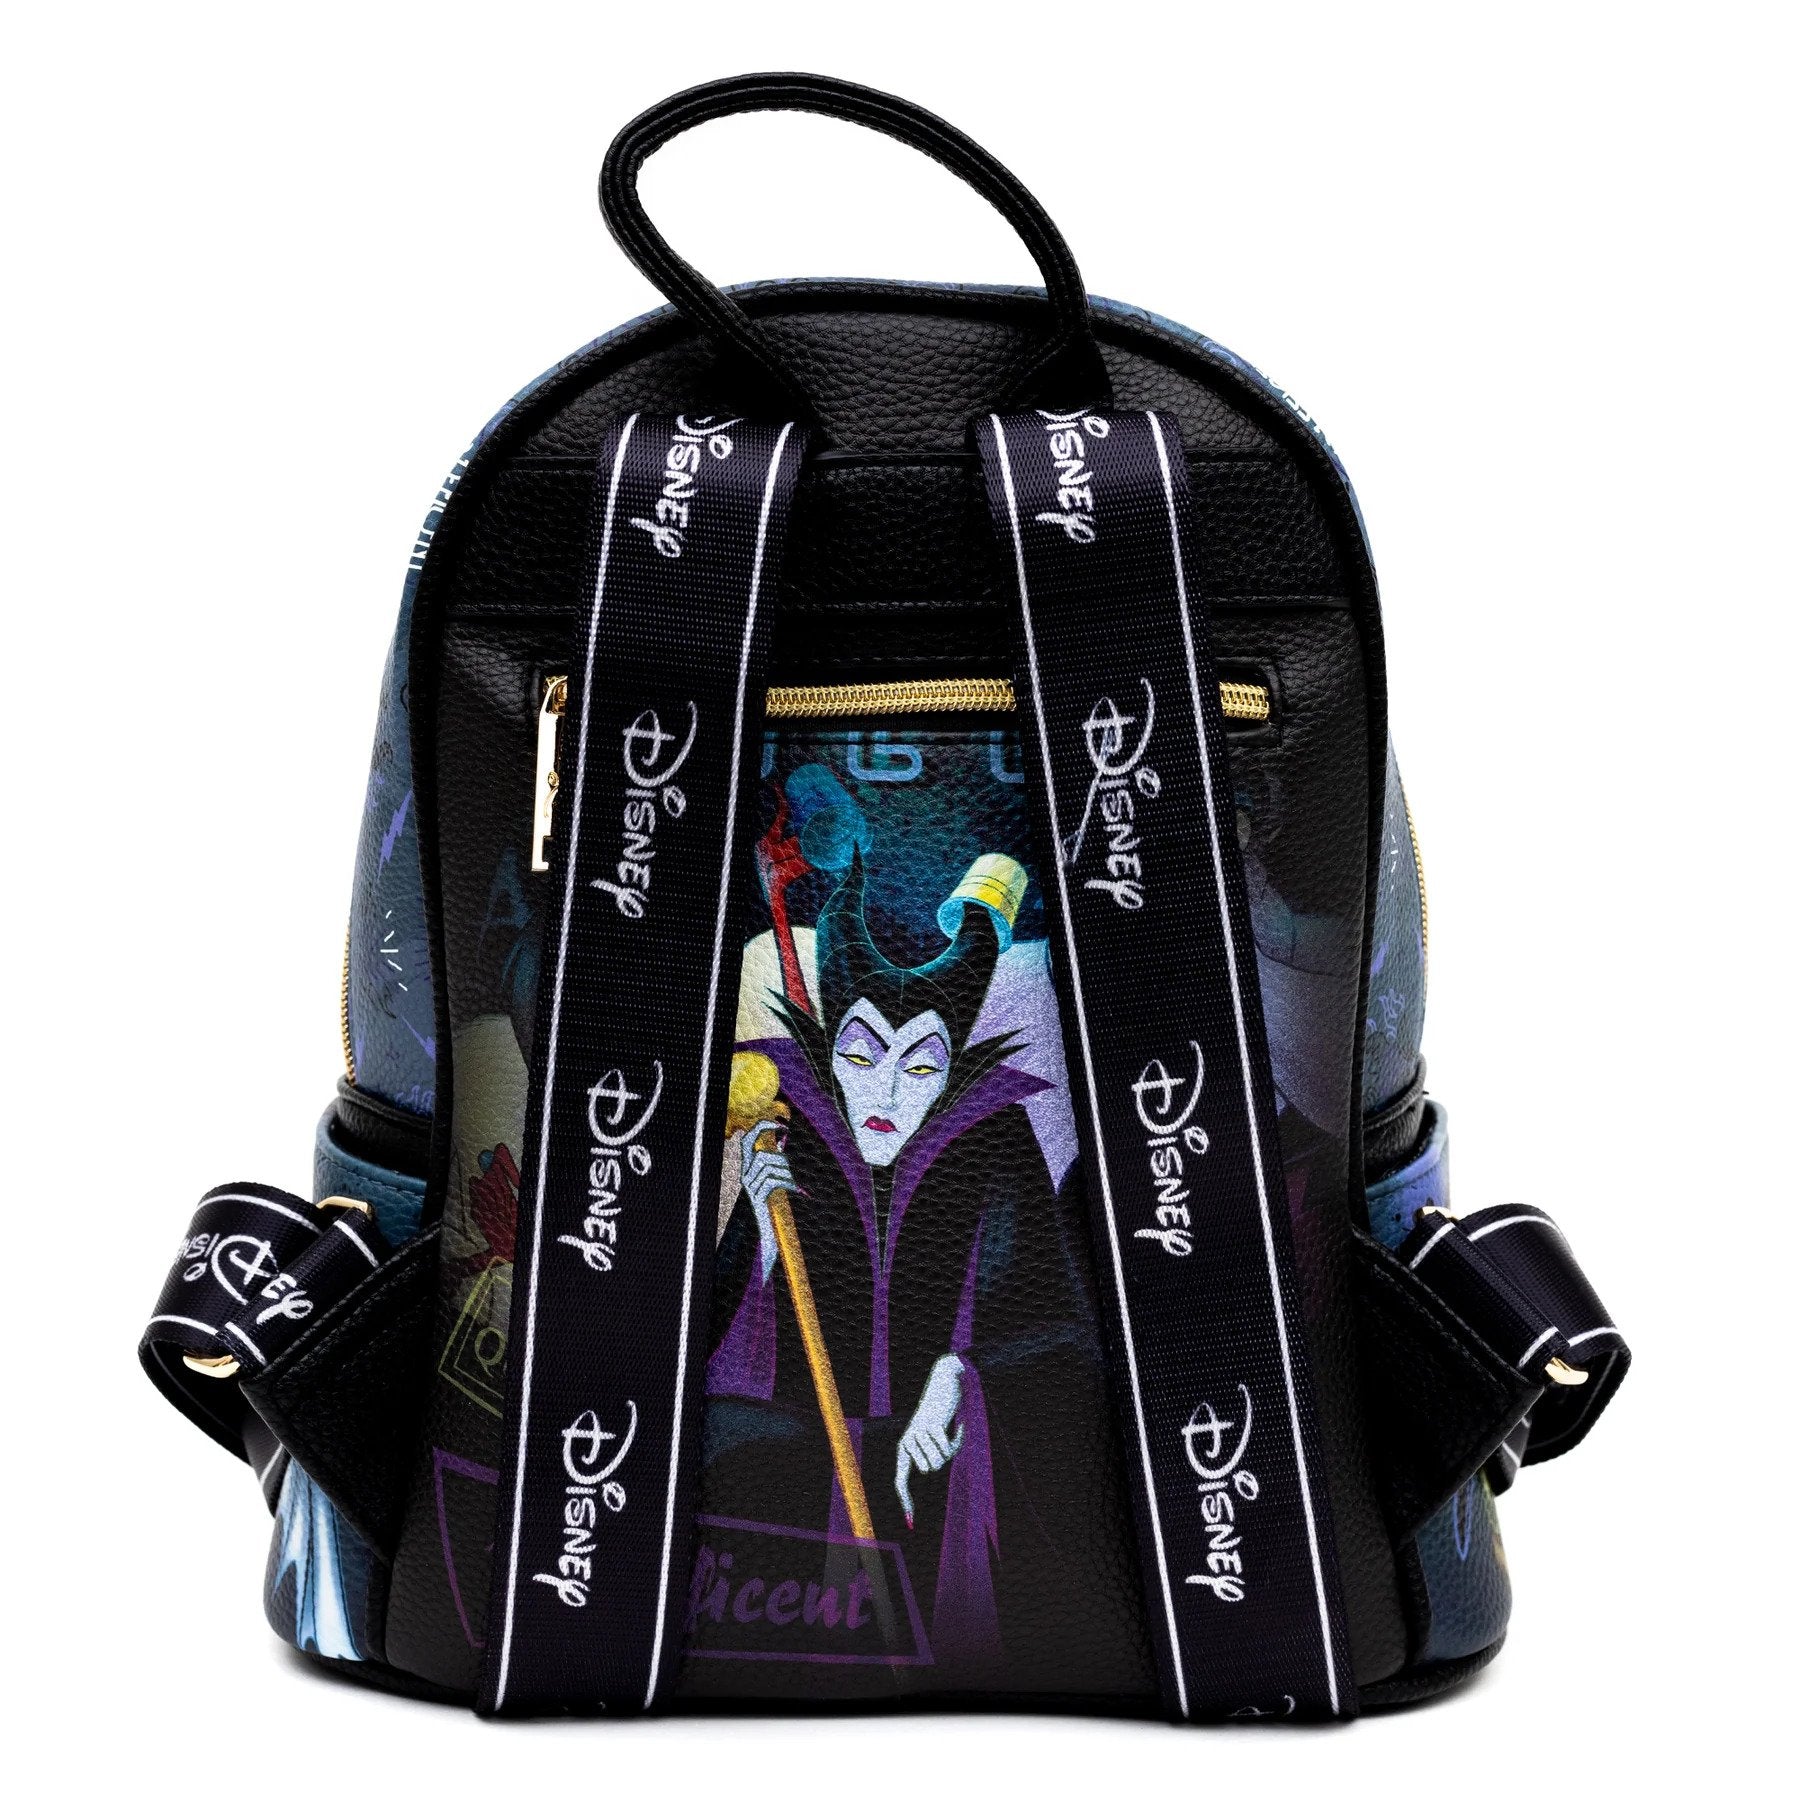 Loungefly, Bags, Maleficent Loungefly Mini Backpack